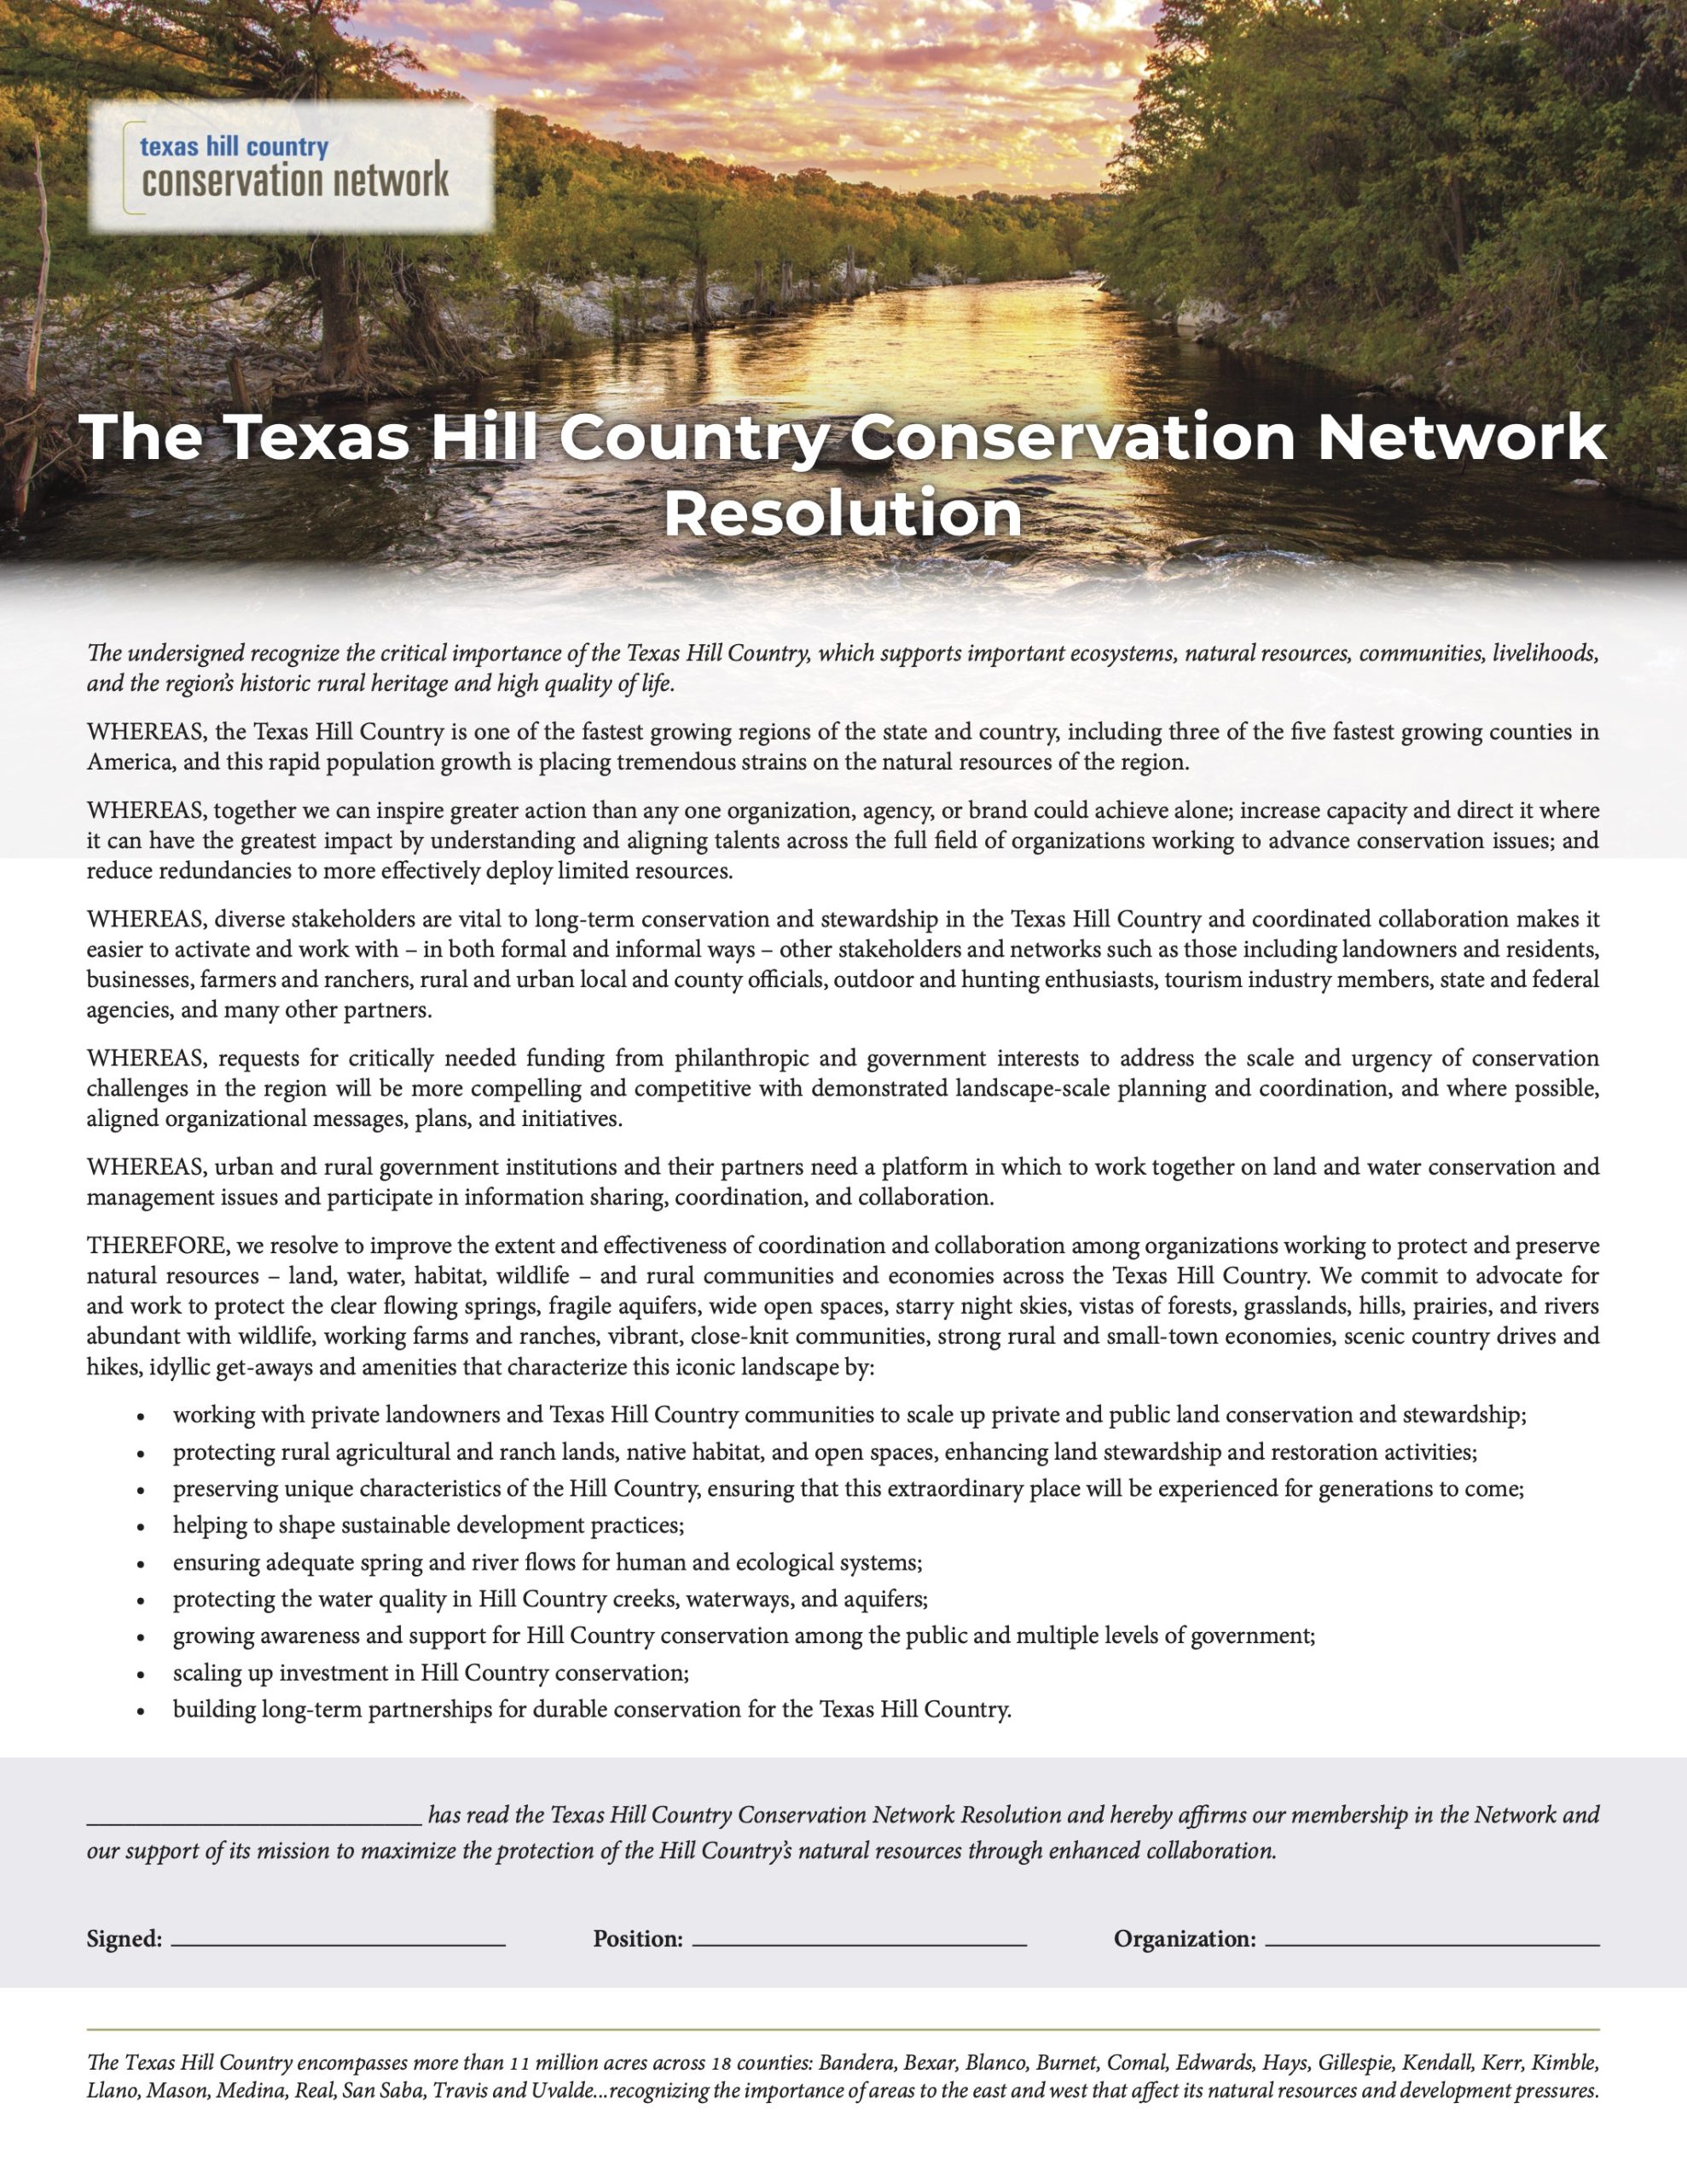 Texas Hill Country Conservation Network Resolution